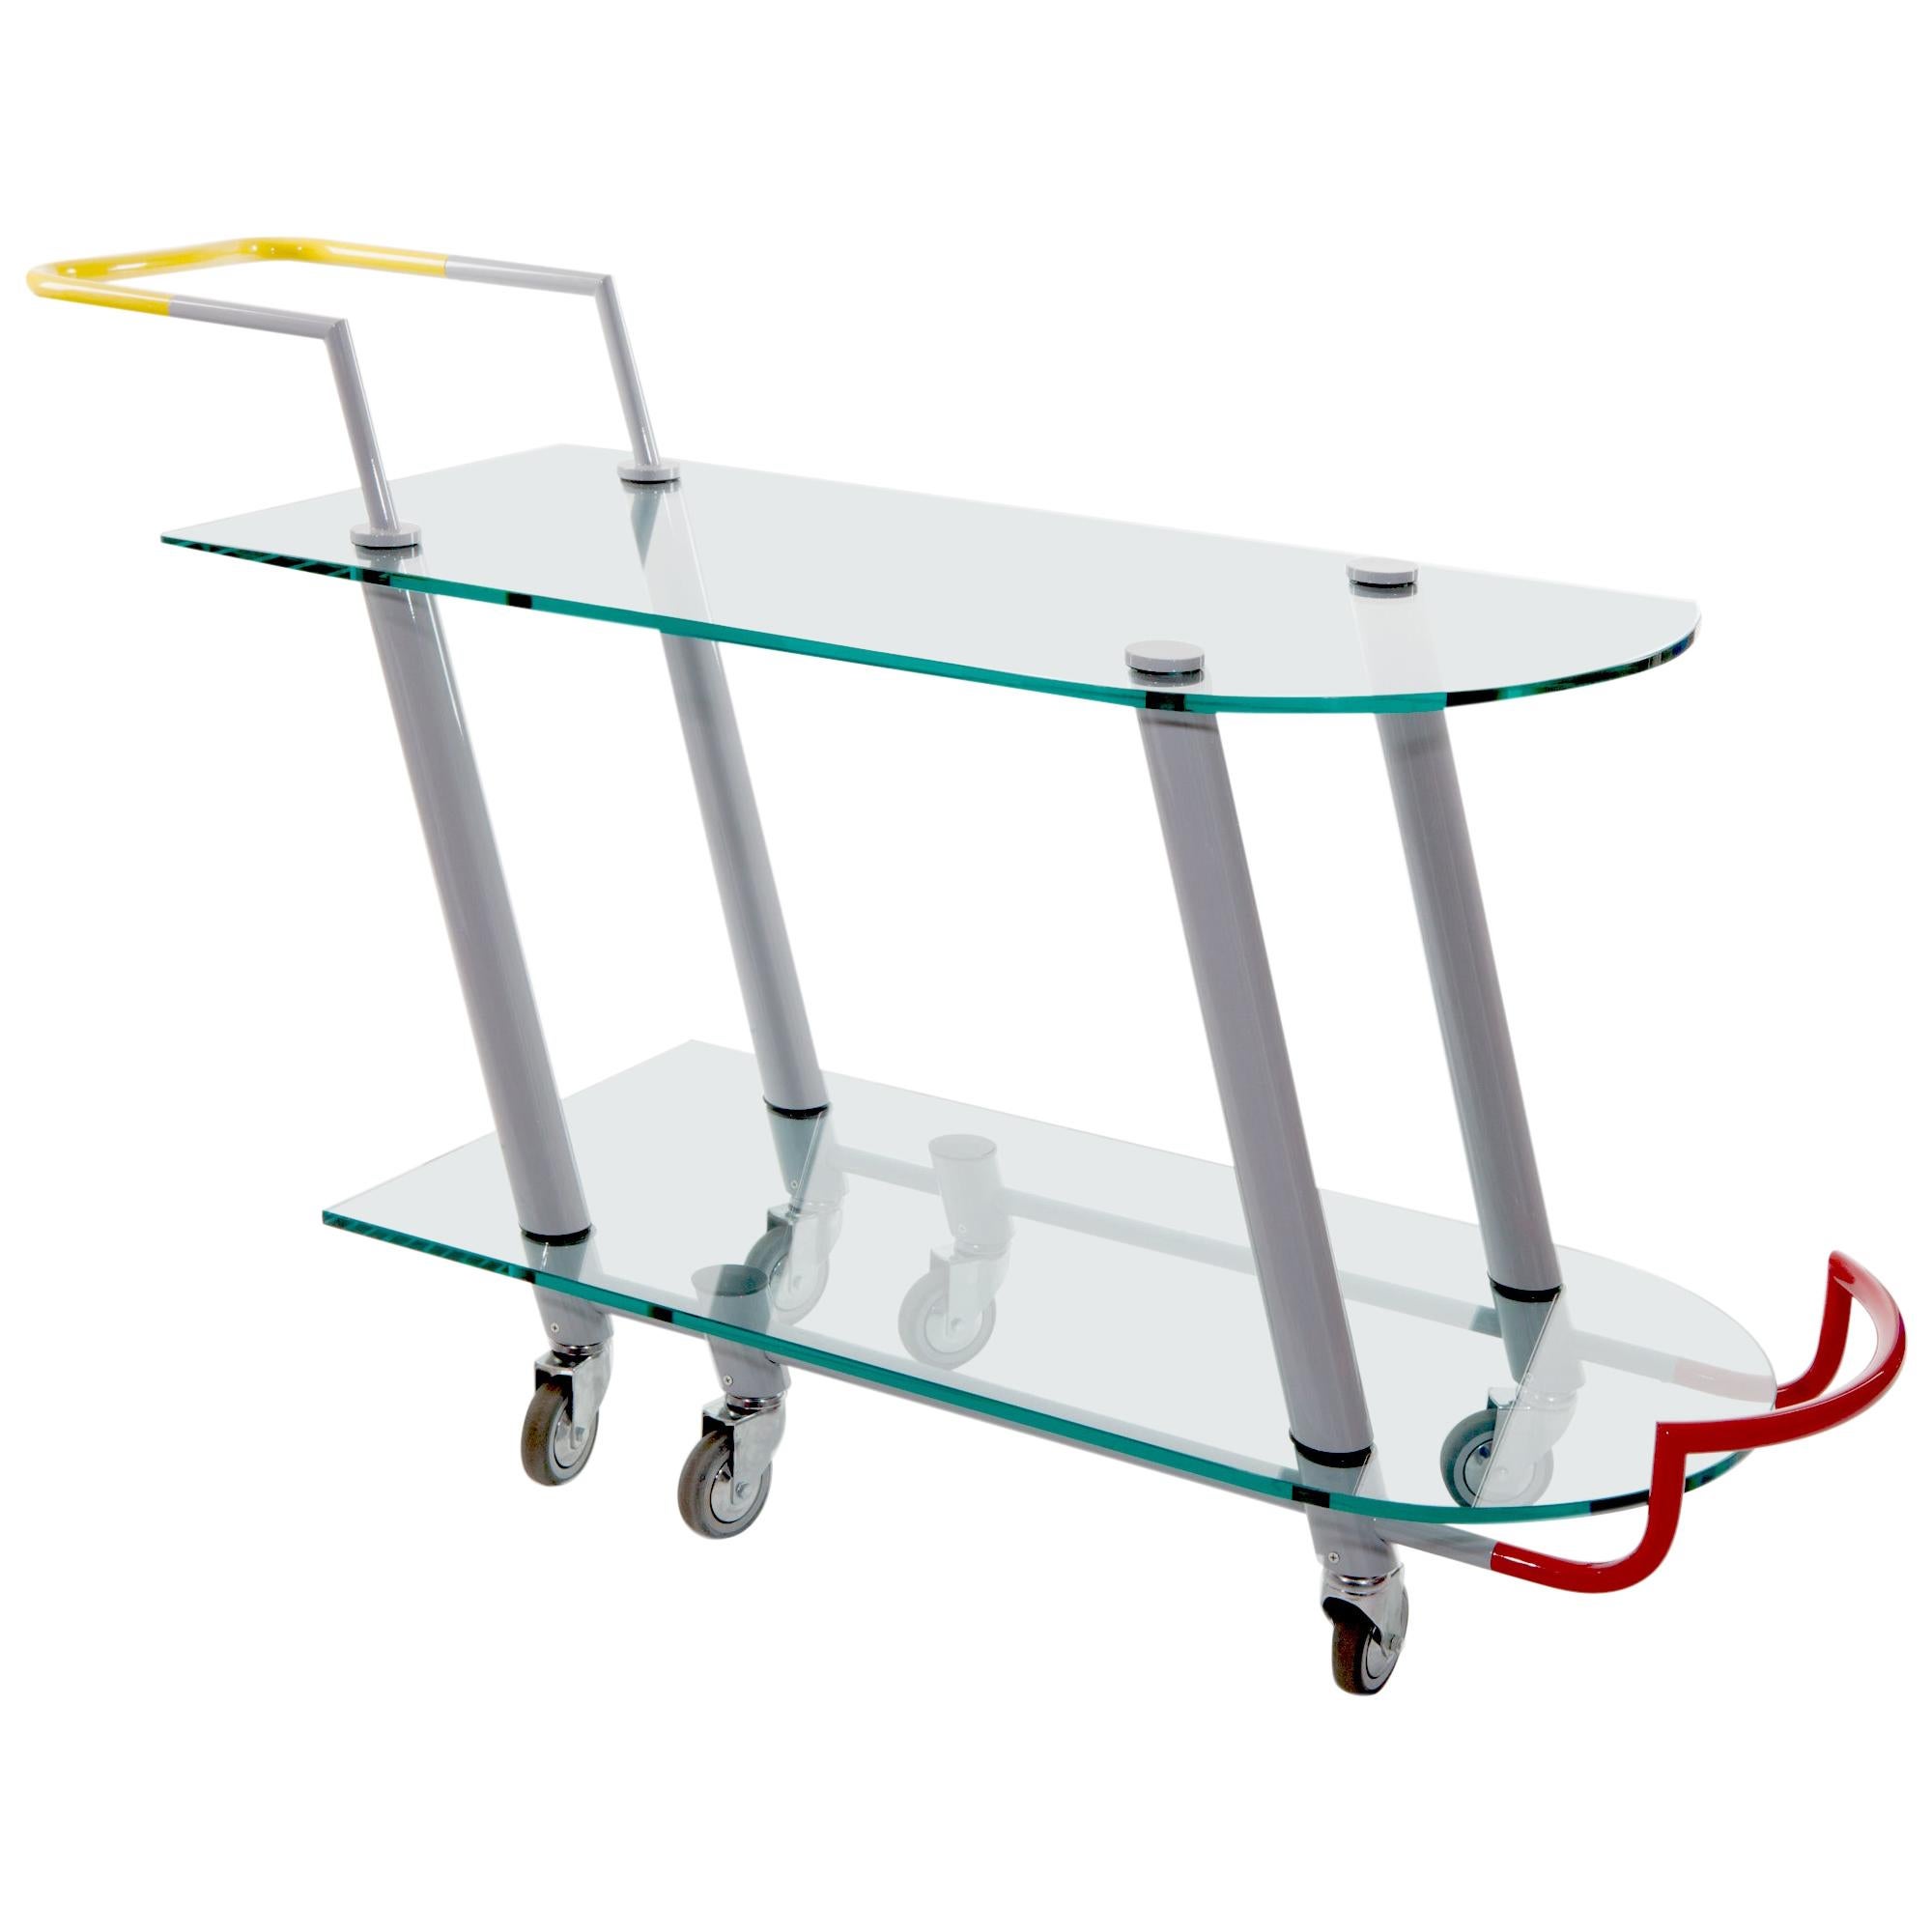 Hilton Metal and Glass Trolley, by Javier Mariscal for Memphis Milano Collection